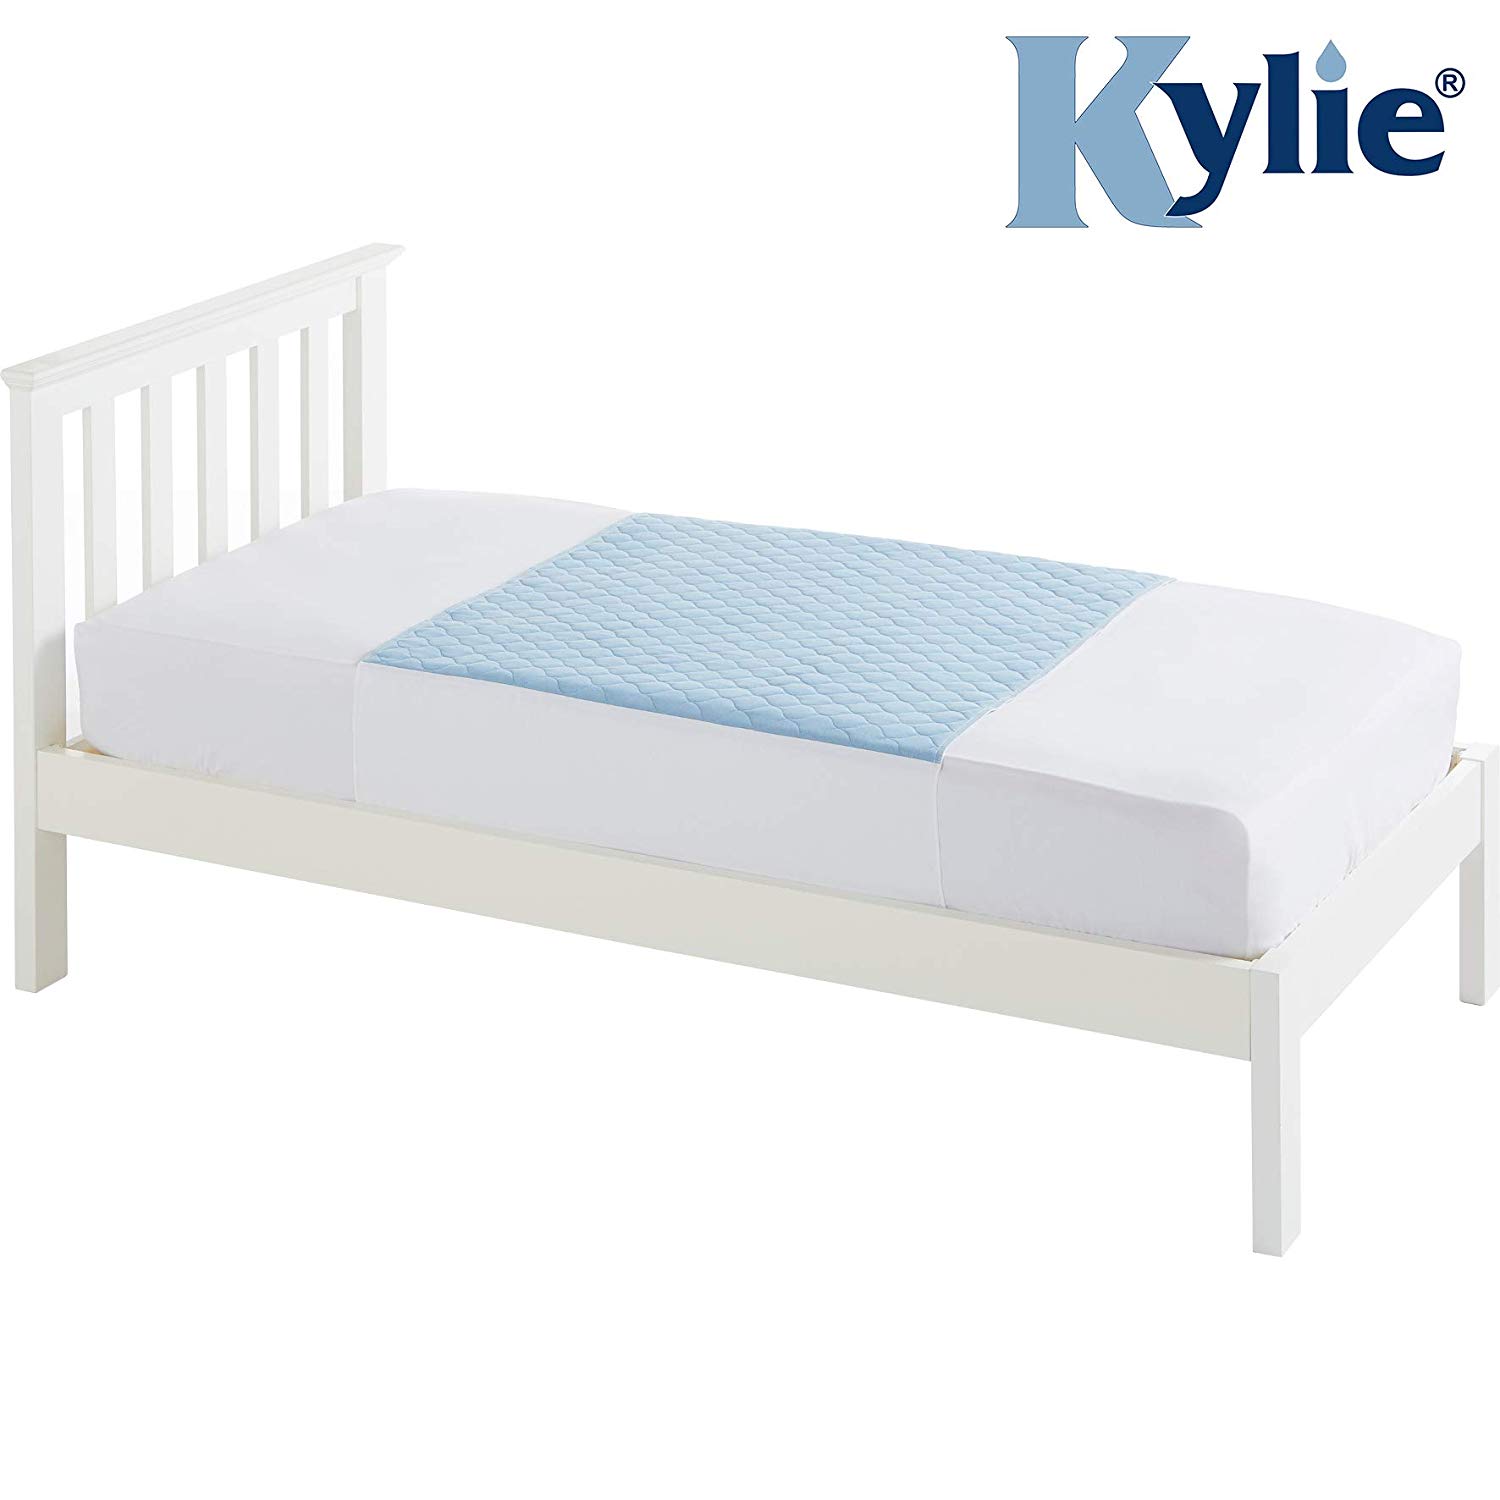 Kylie Bed Protector | Blue | 3 Litres | Single Bed 91 x 91 cm | Washable Absorbent Incontinence Pad | Waterproof Underlay | With Wings 50 cm | Premium Quality and Comfort